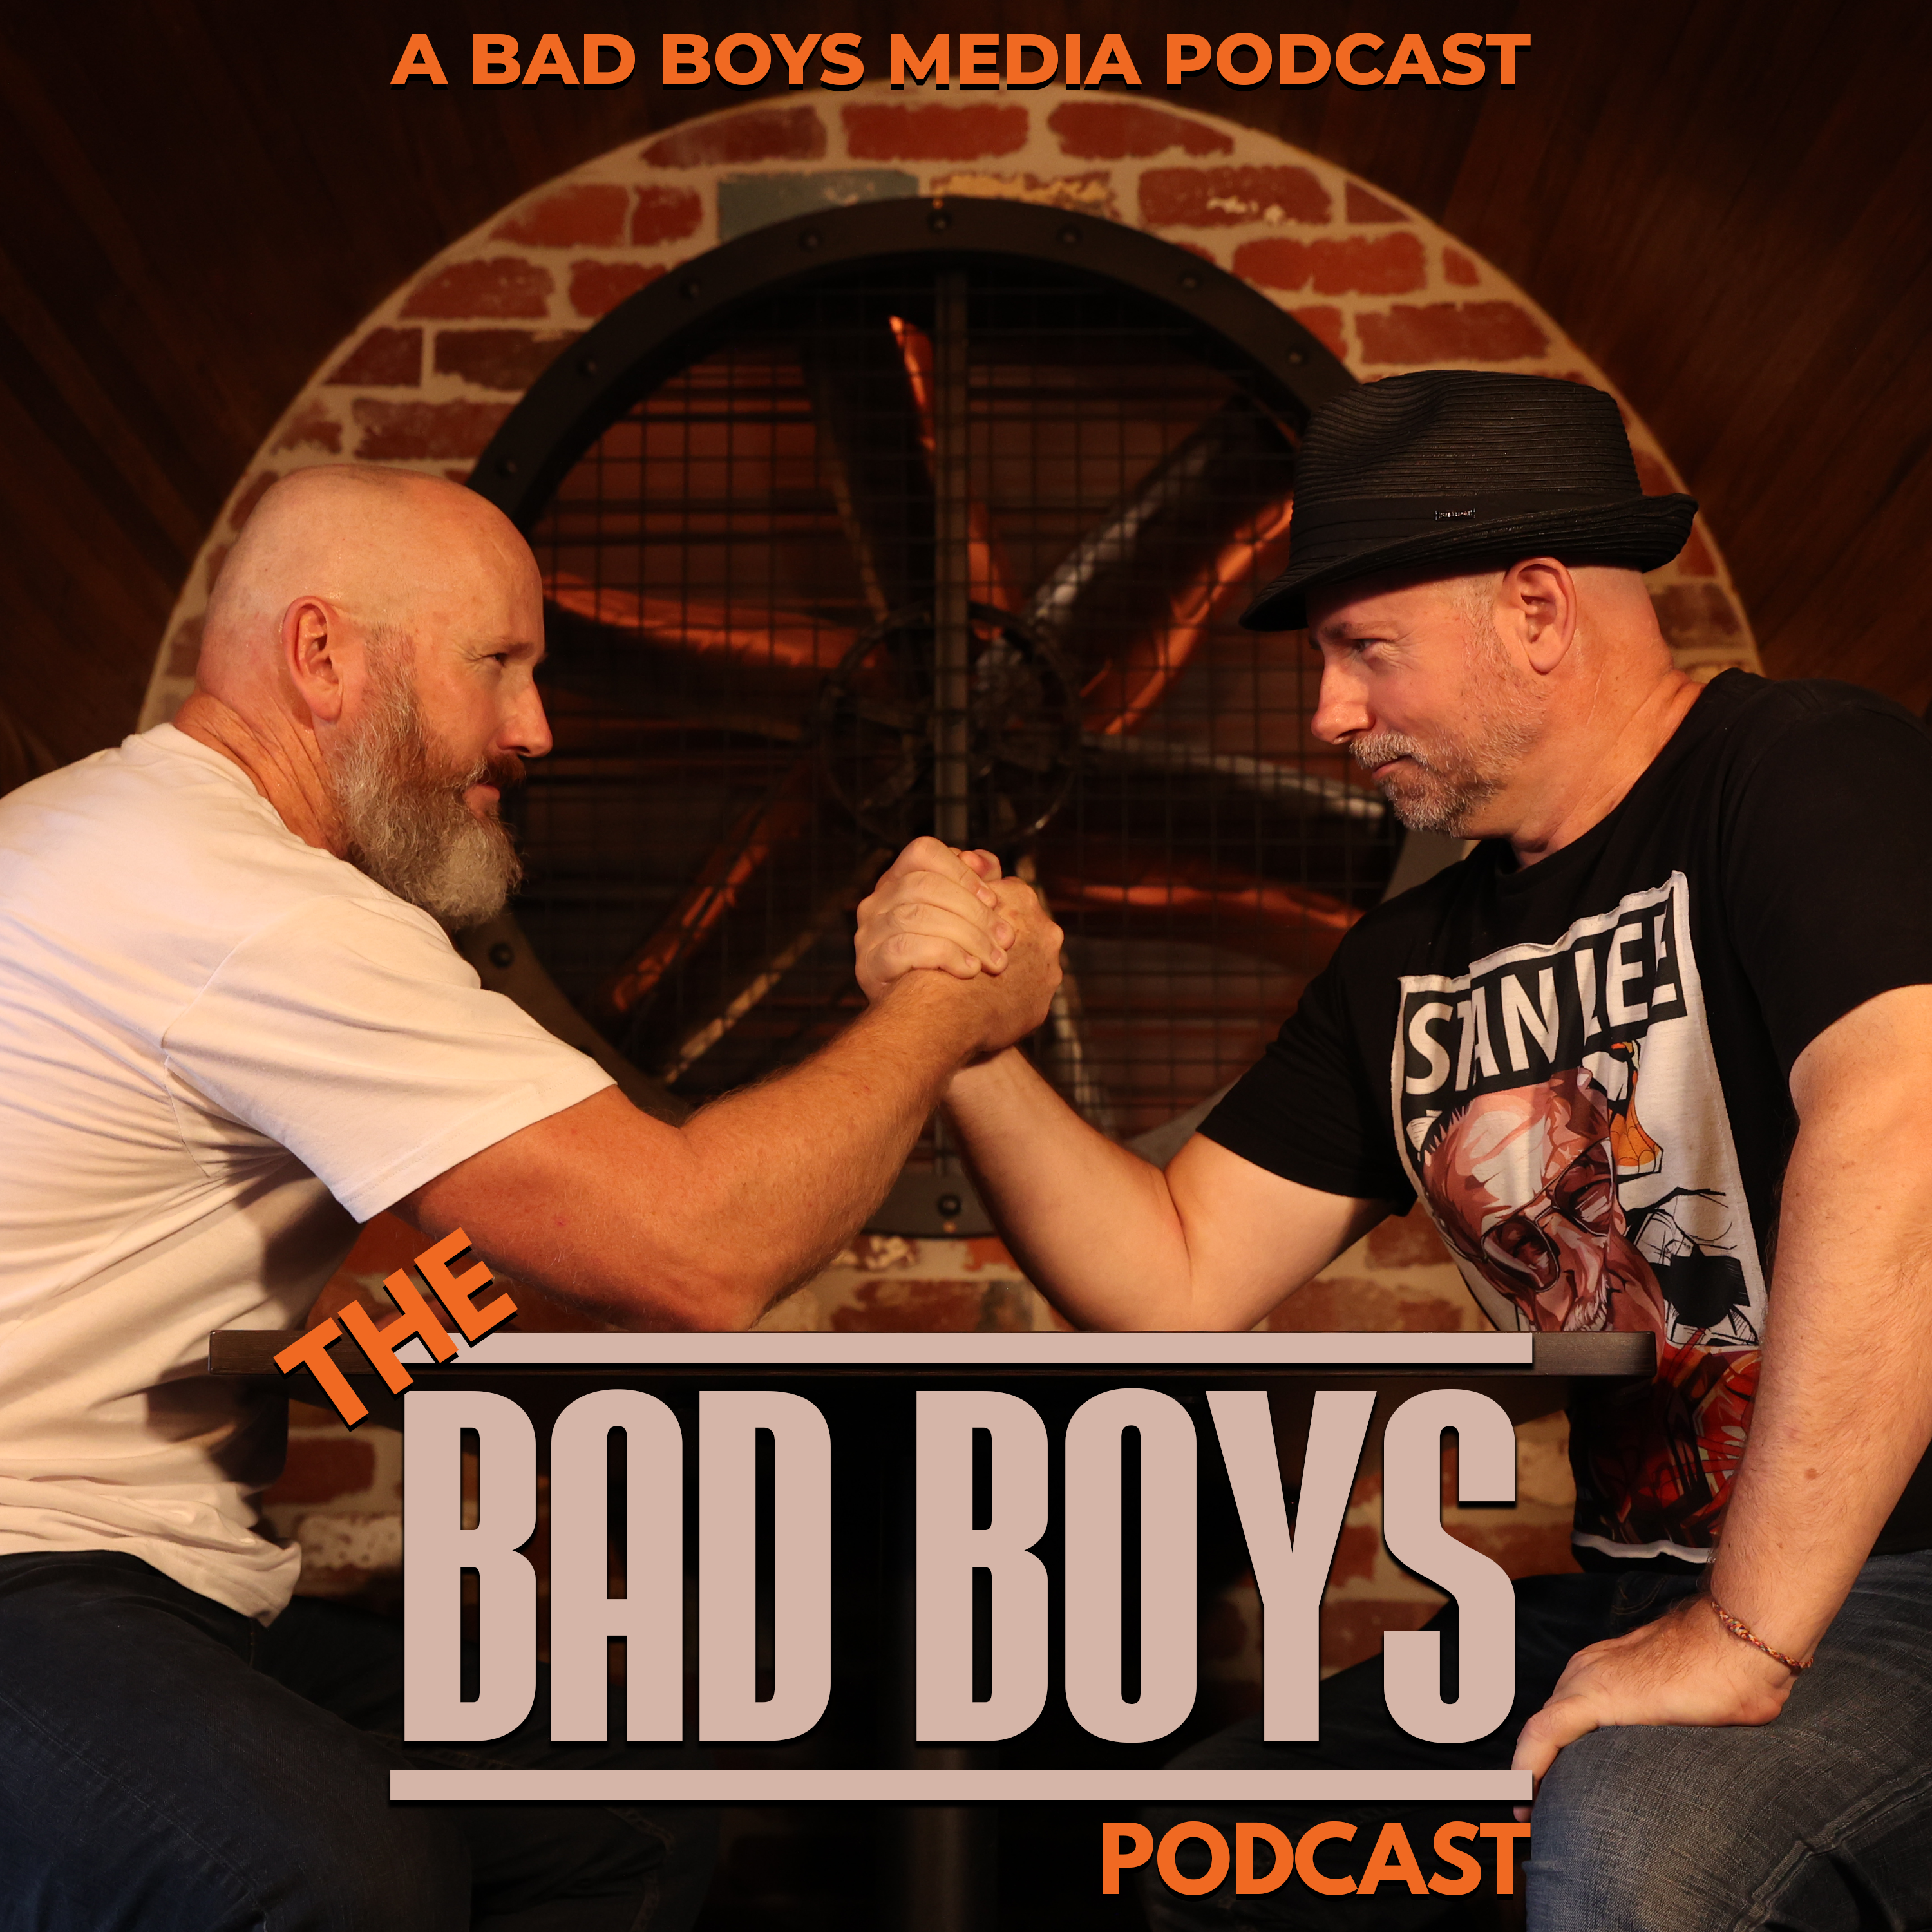 The Bad Boys Podcast - Australia, You're Standing In It